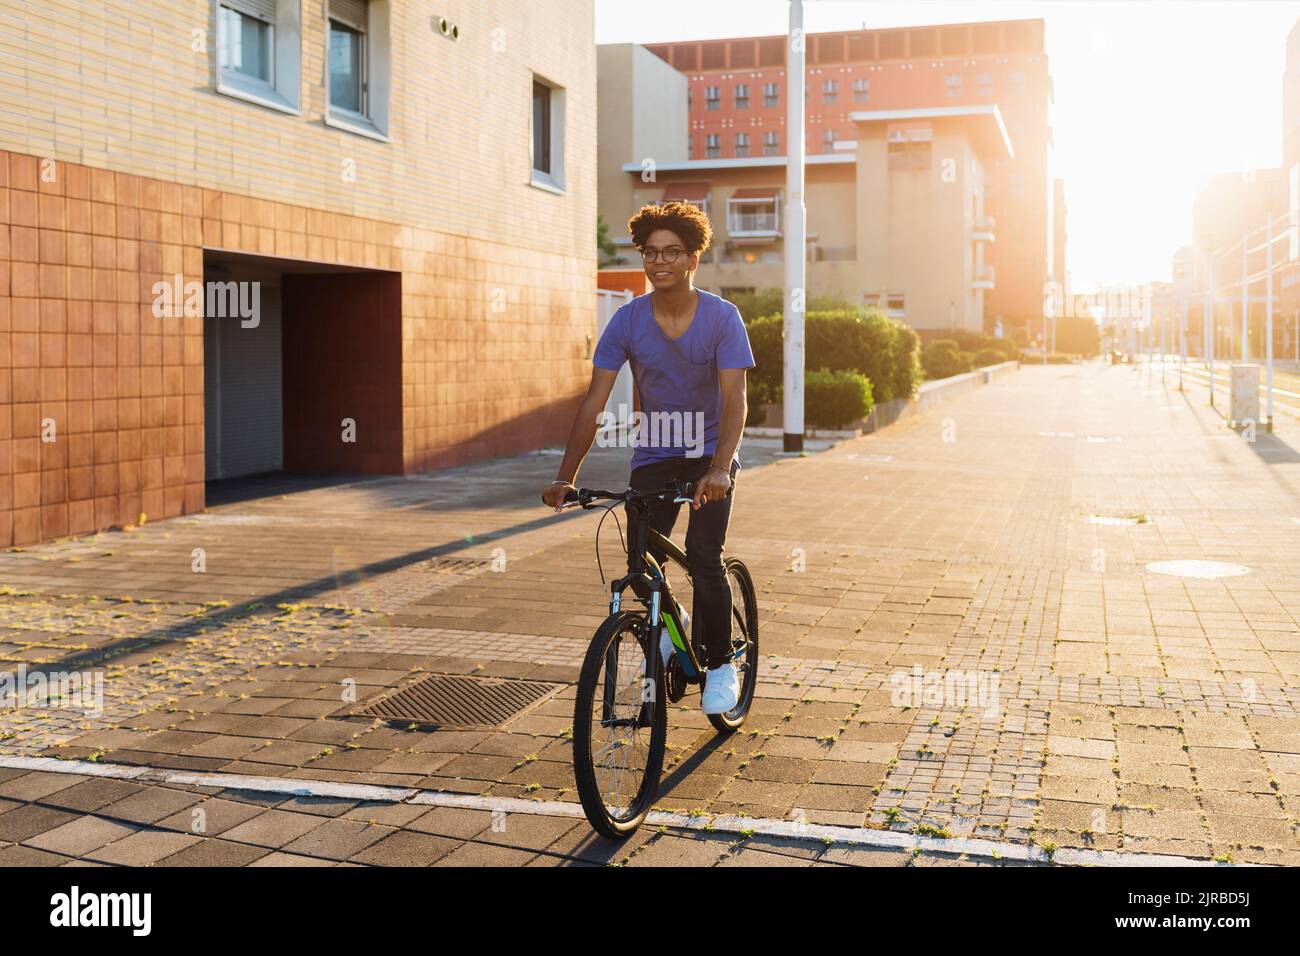 Smiling man cycling in city at sunset Stock Photo